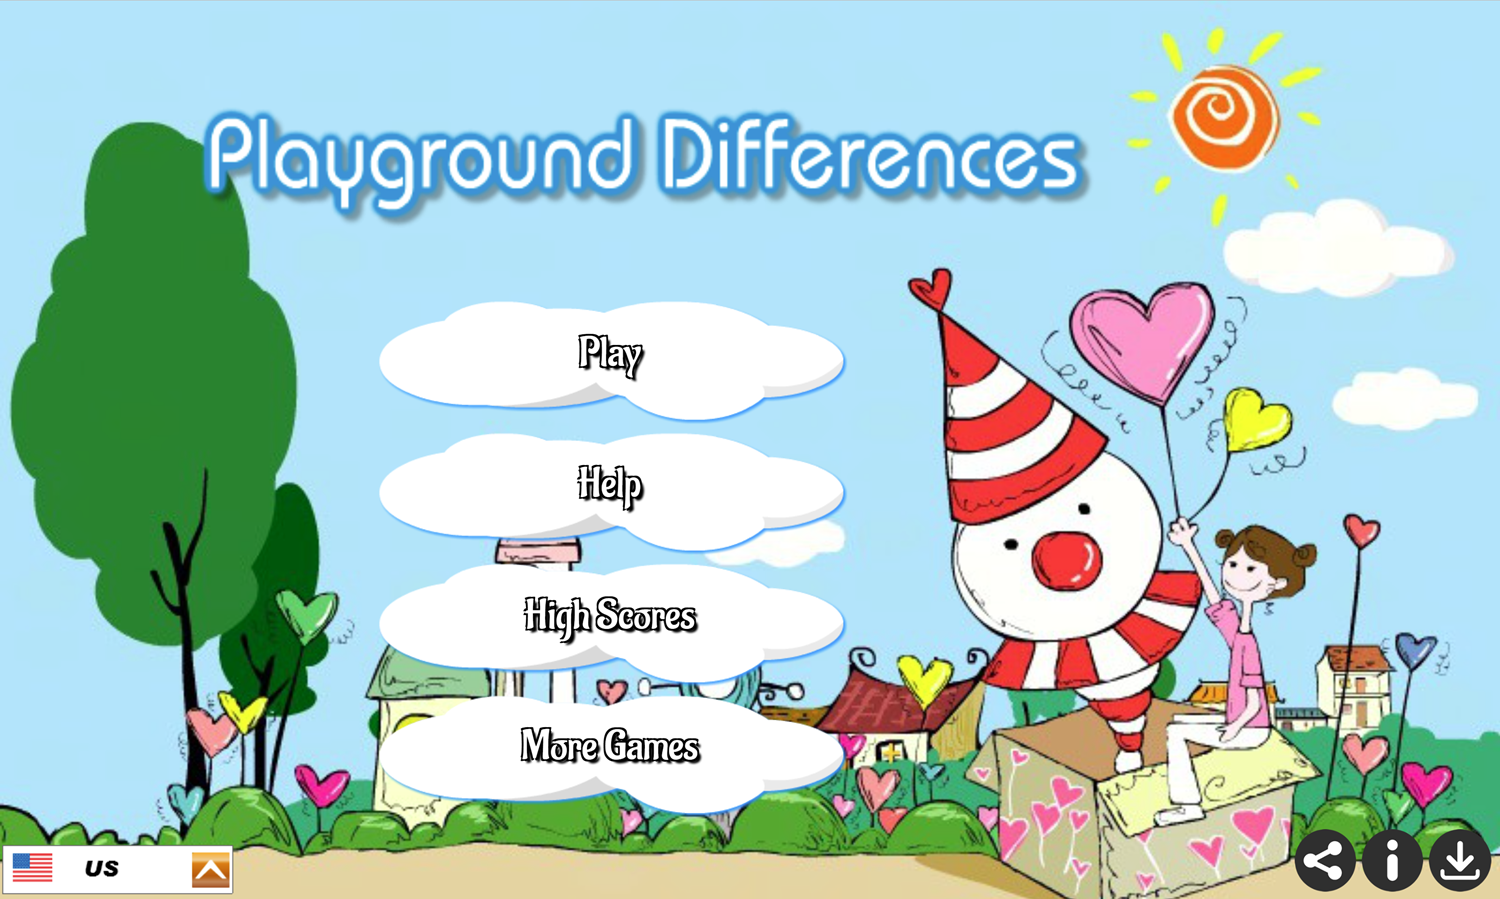 Playground Differences Game Welcome Screen Screenshot.